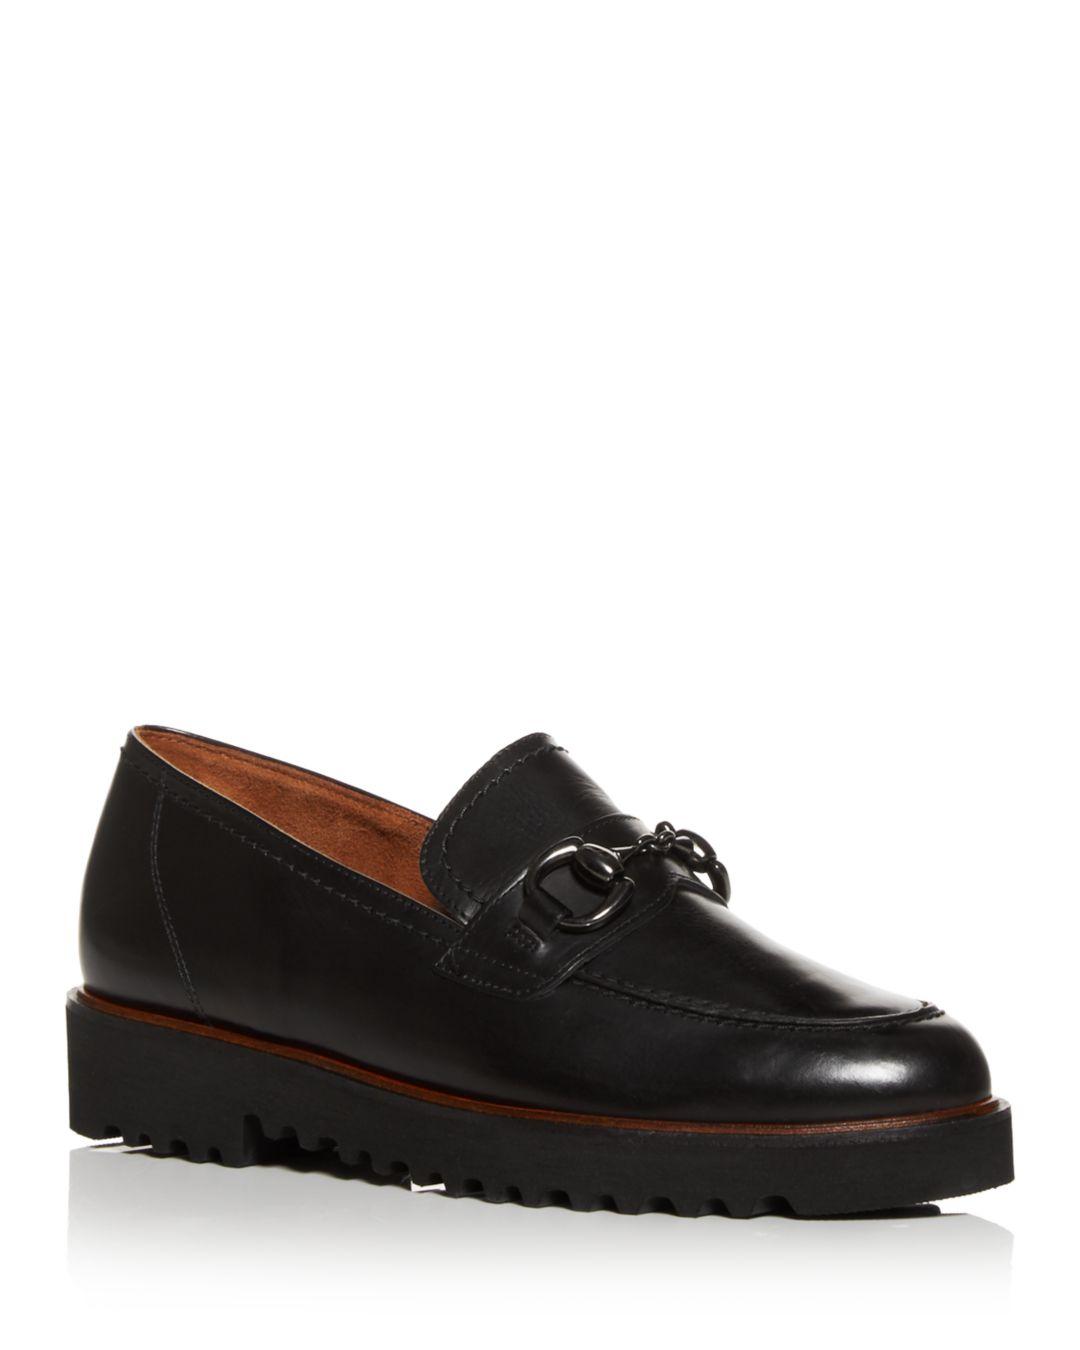 Paul Green Leather Eleanor Loafers in Black Leather (Black) - Lyst